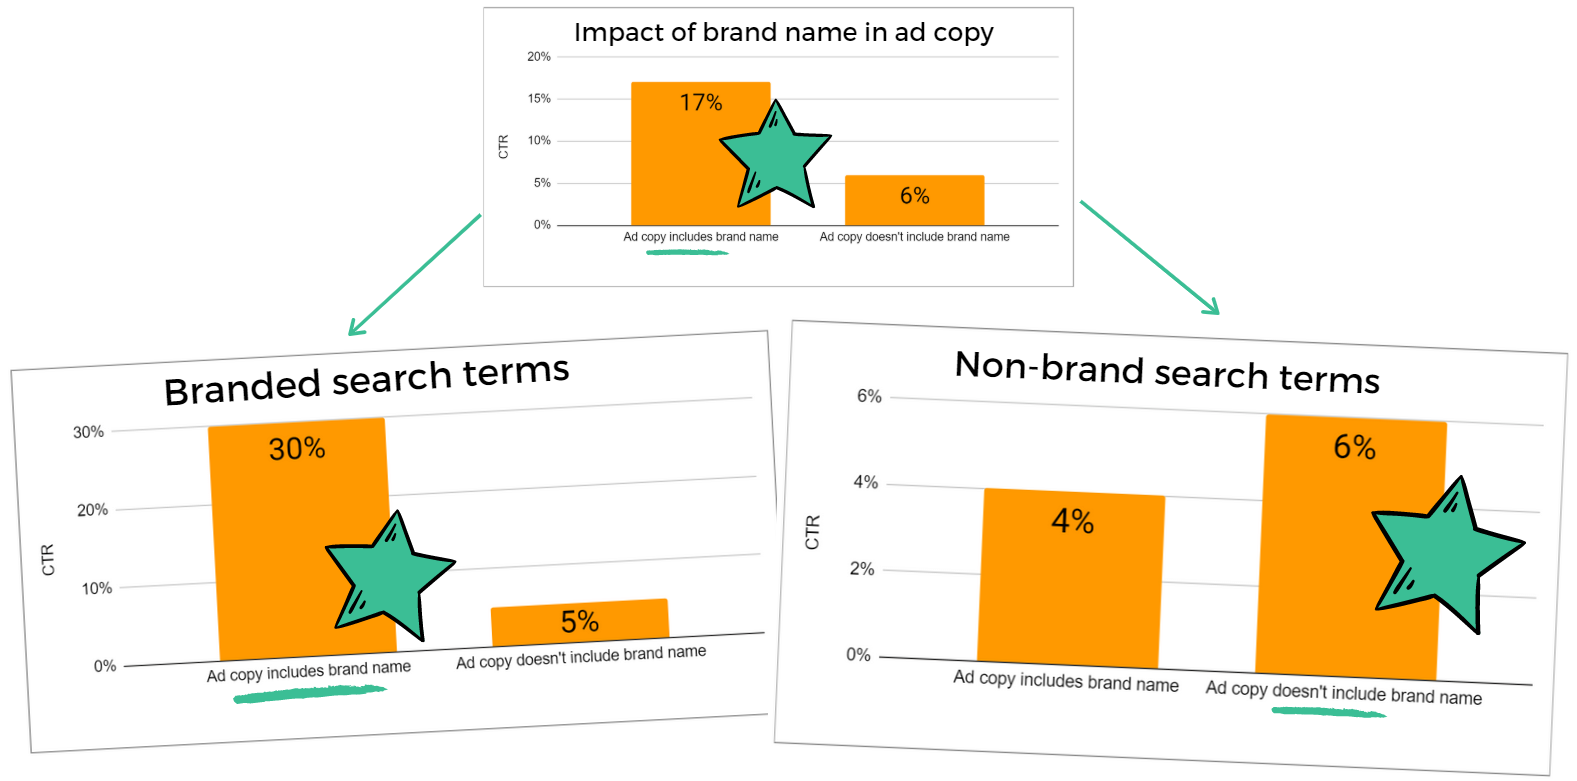 ad copy ctr graph segmented by brand and non-brand